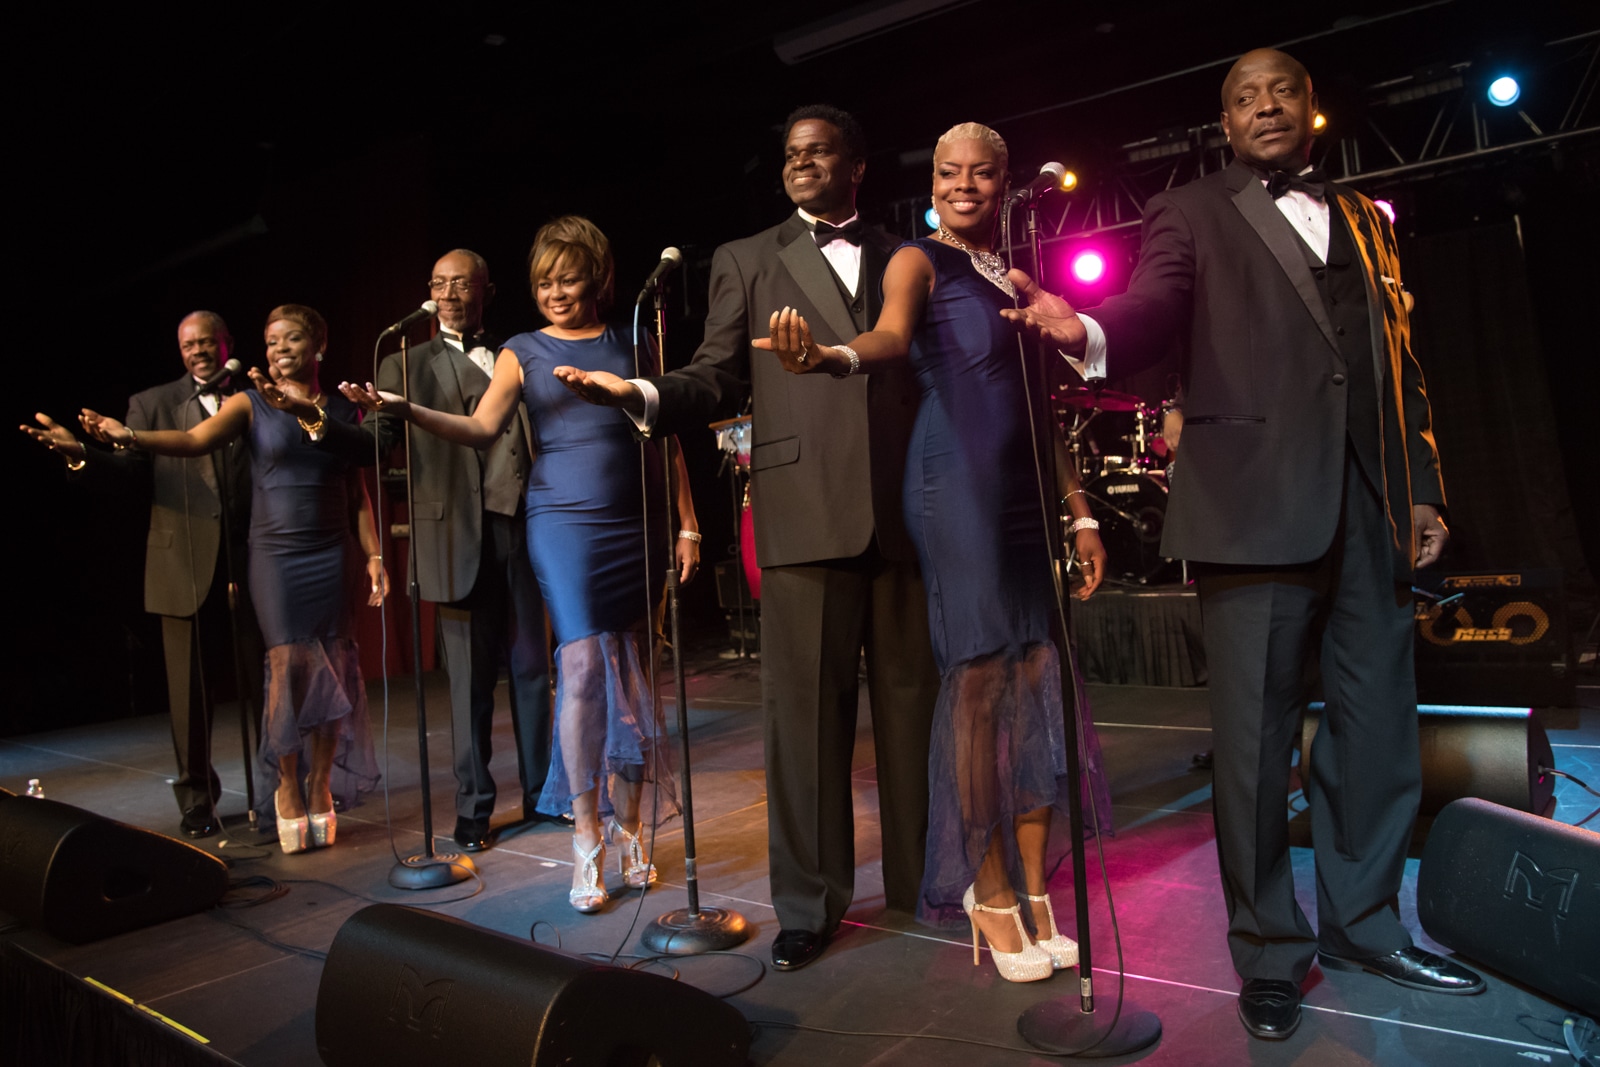 Fabulous Motown Revue is a motown cover band